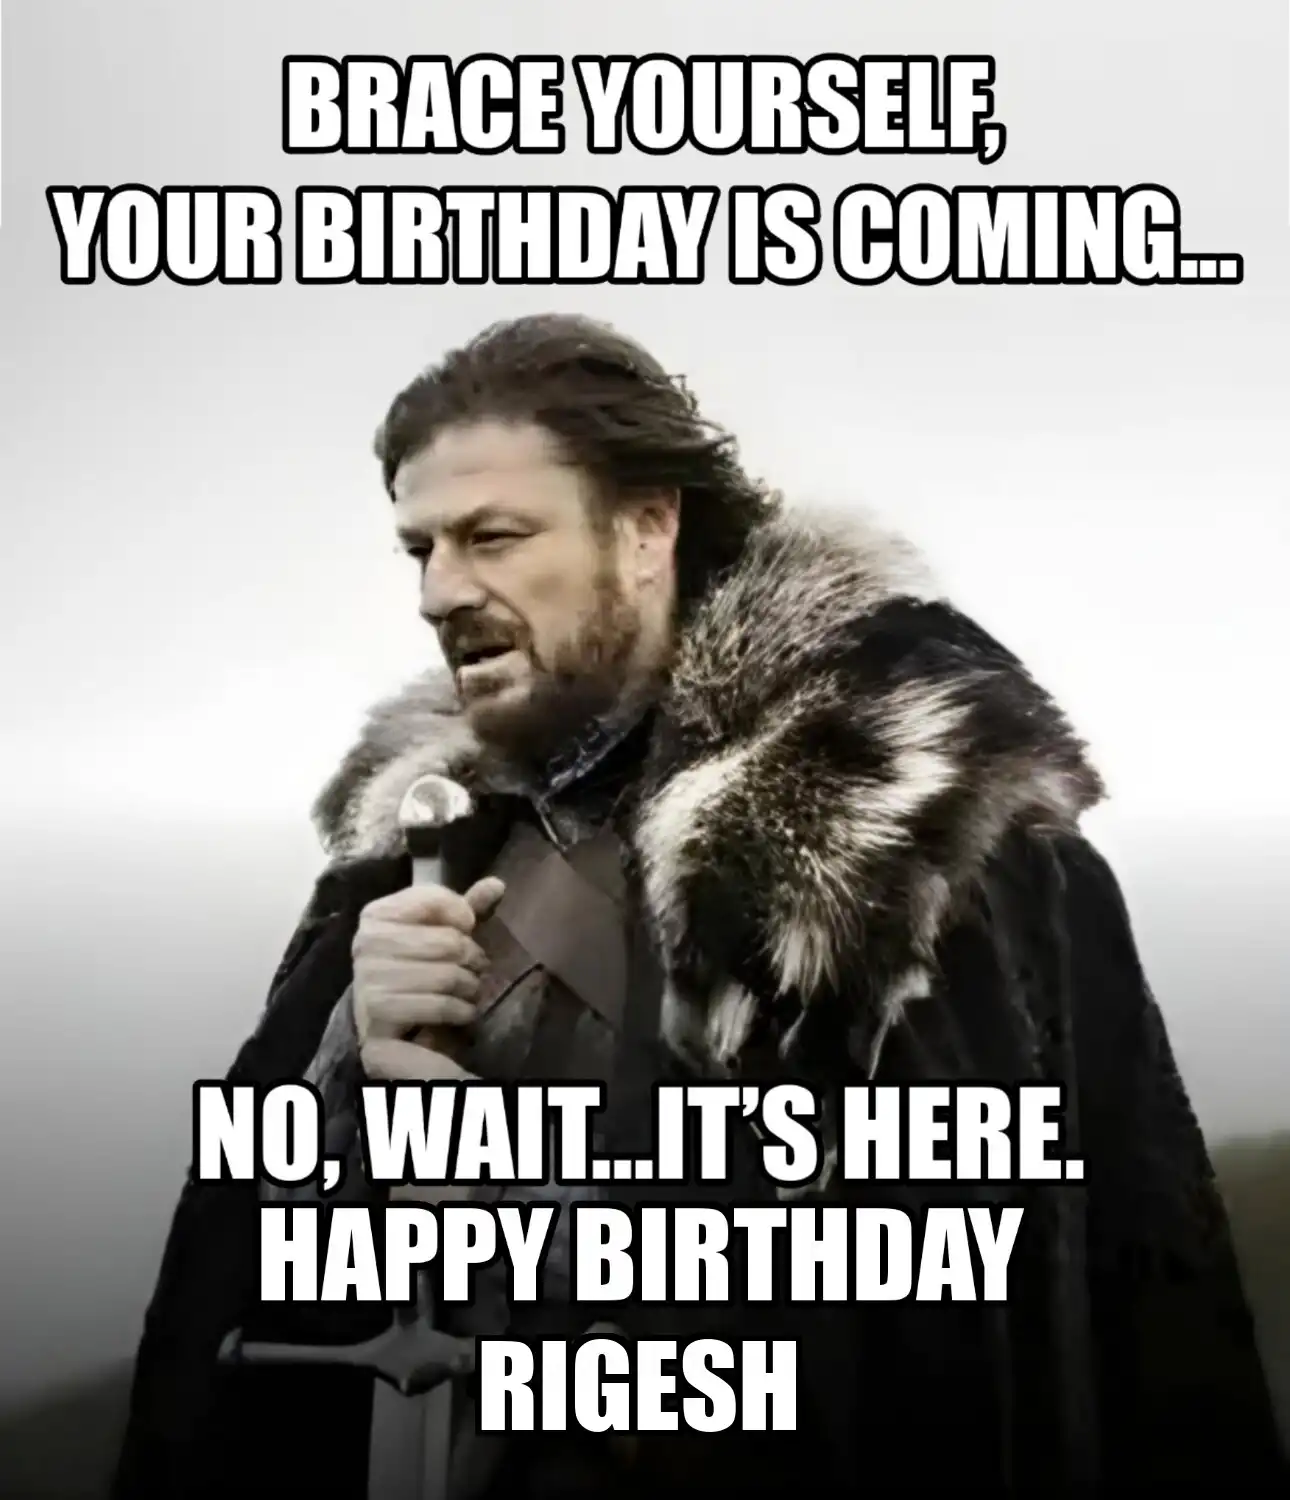 Happy Birthday Rigesh Brace Yourself Your Birthday Is Coming Meme